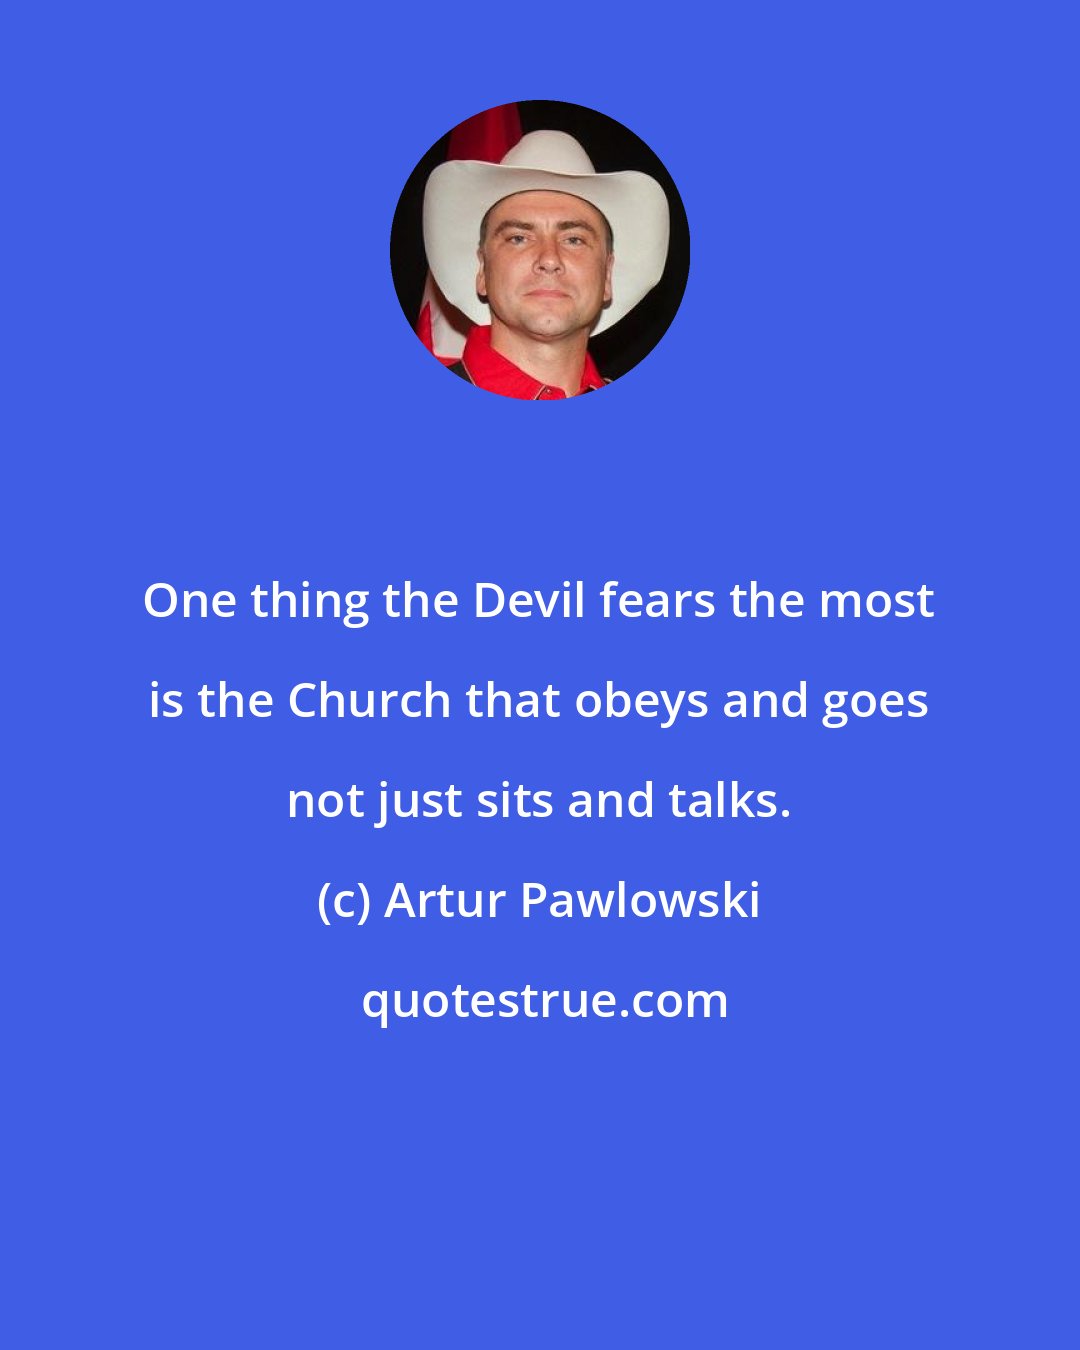 Artur Pawlowski: One thing the Devil fears the most is the Church that obeys and goes not just sits and talks.